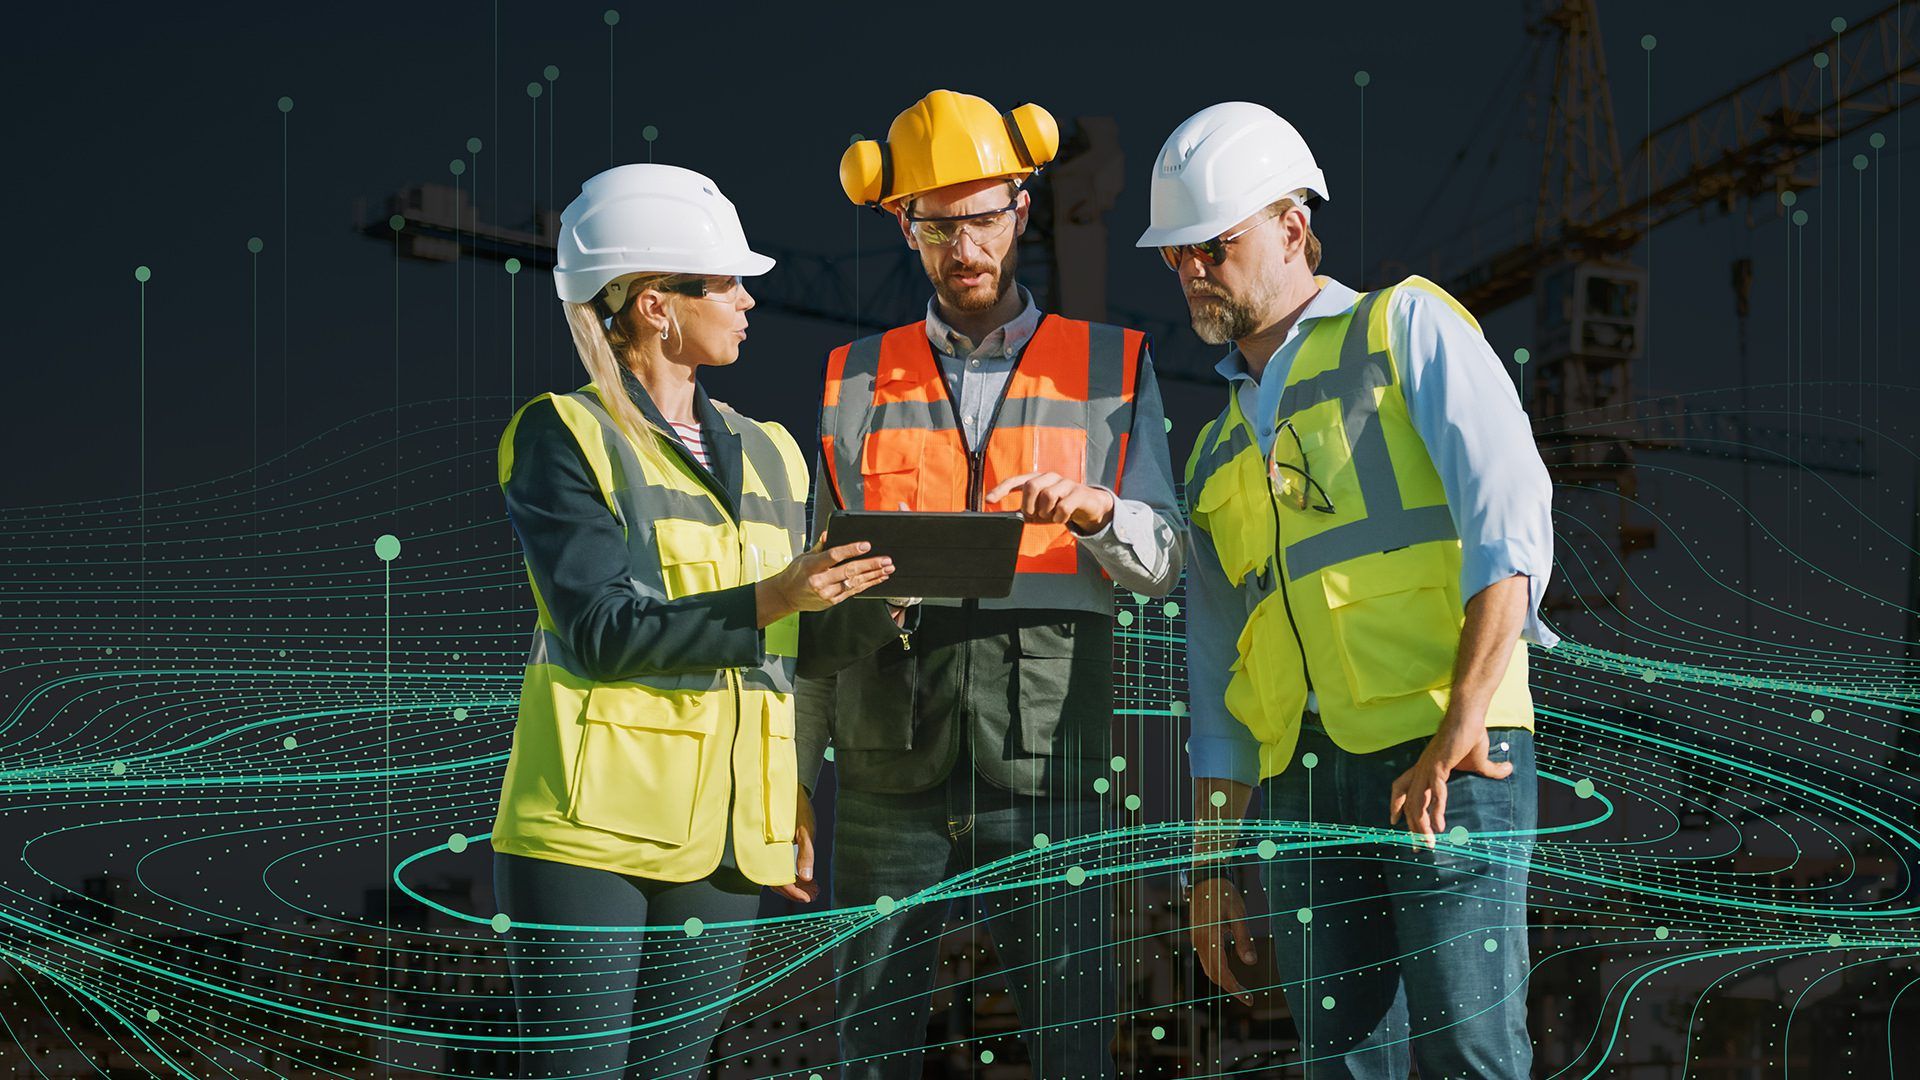 Construction data strategy, technology leaders share predictions on upskilling workforce